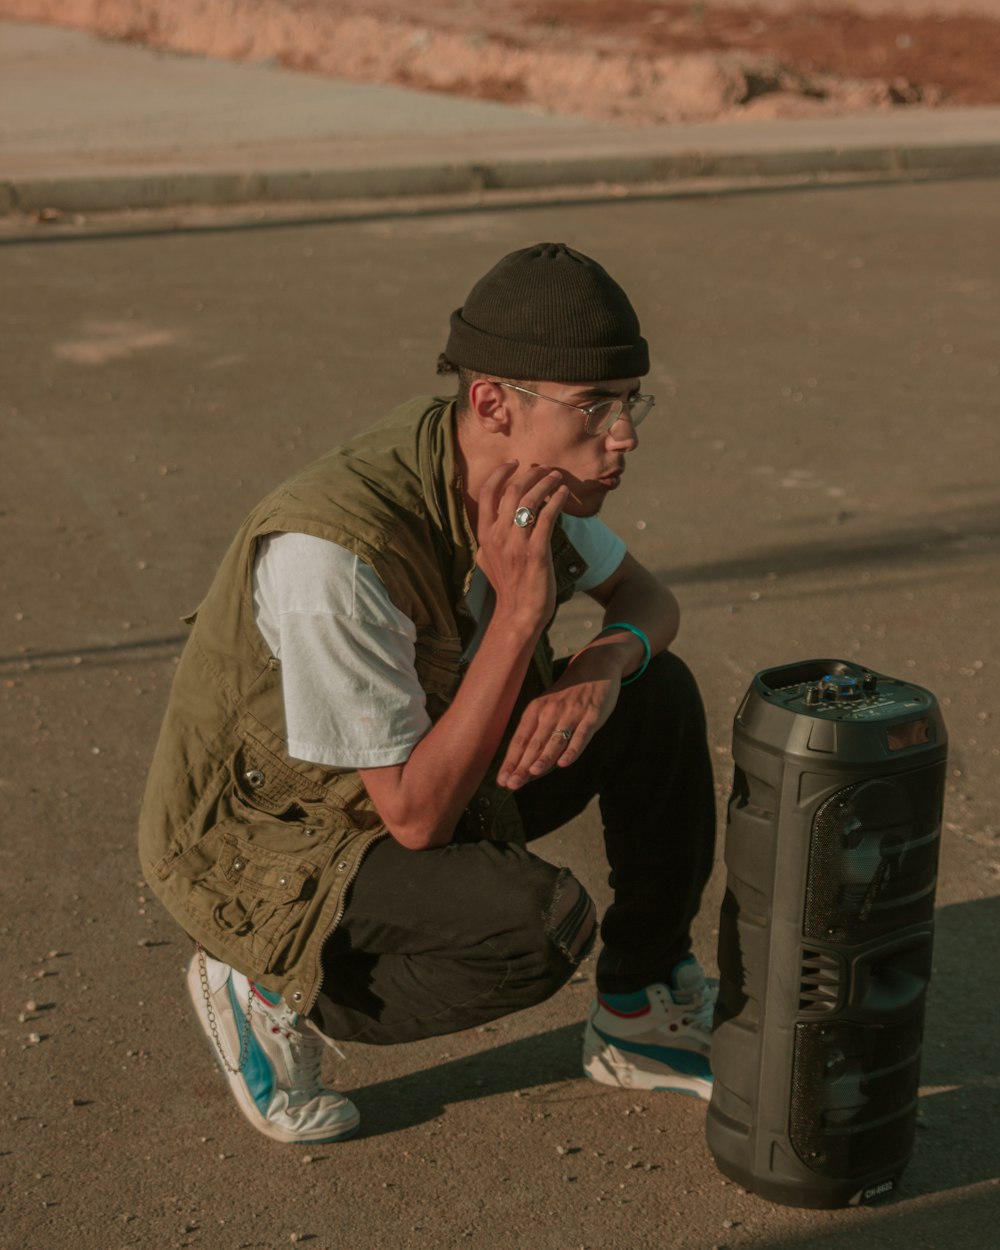 a man kneeling down next to a trash can